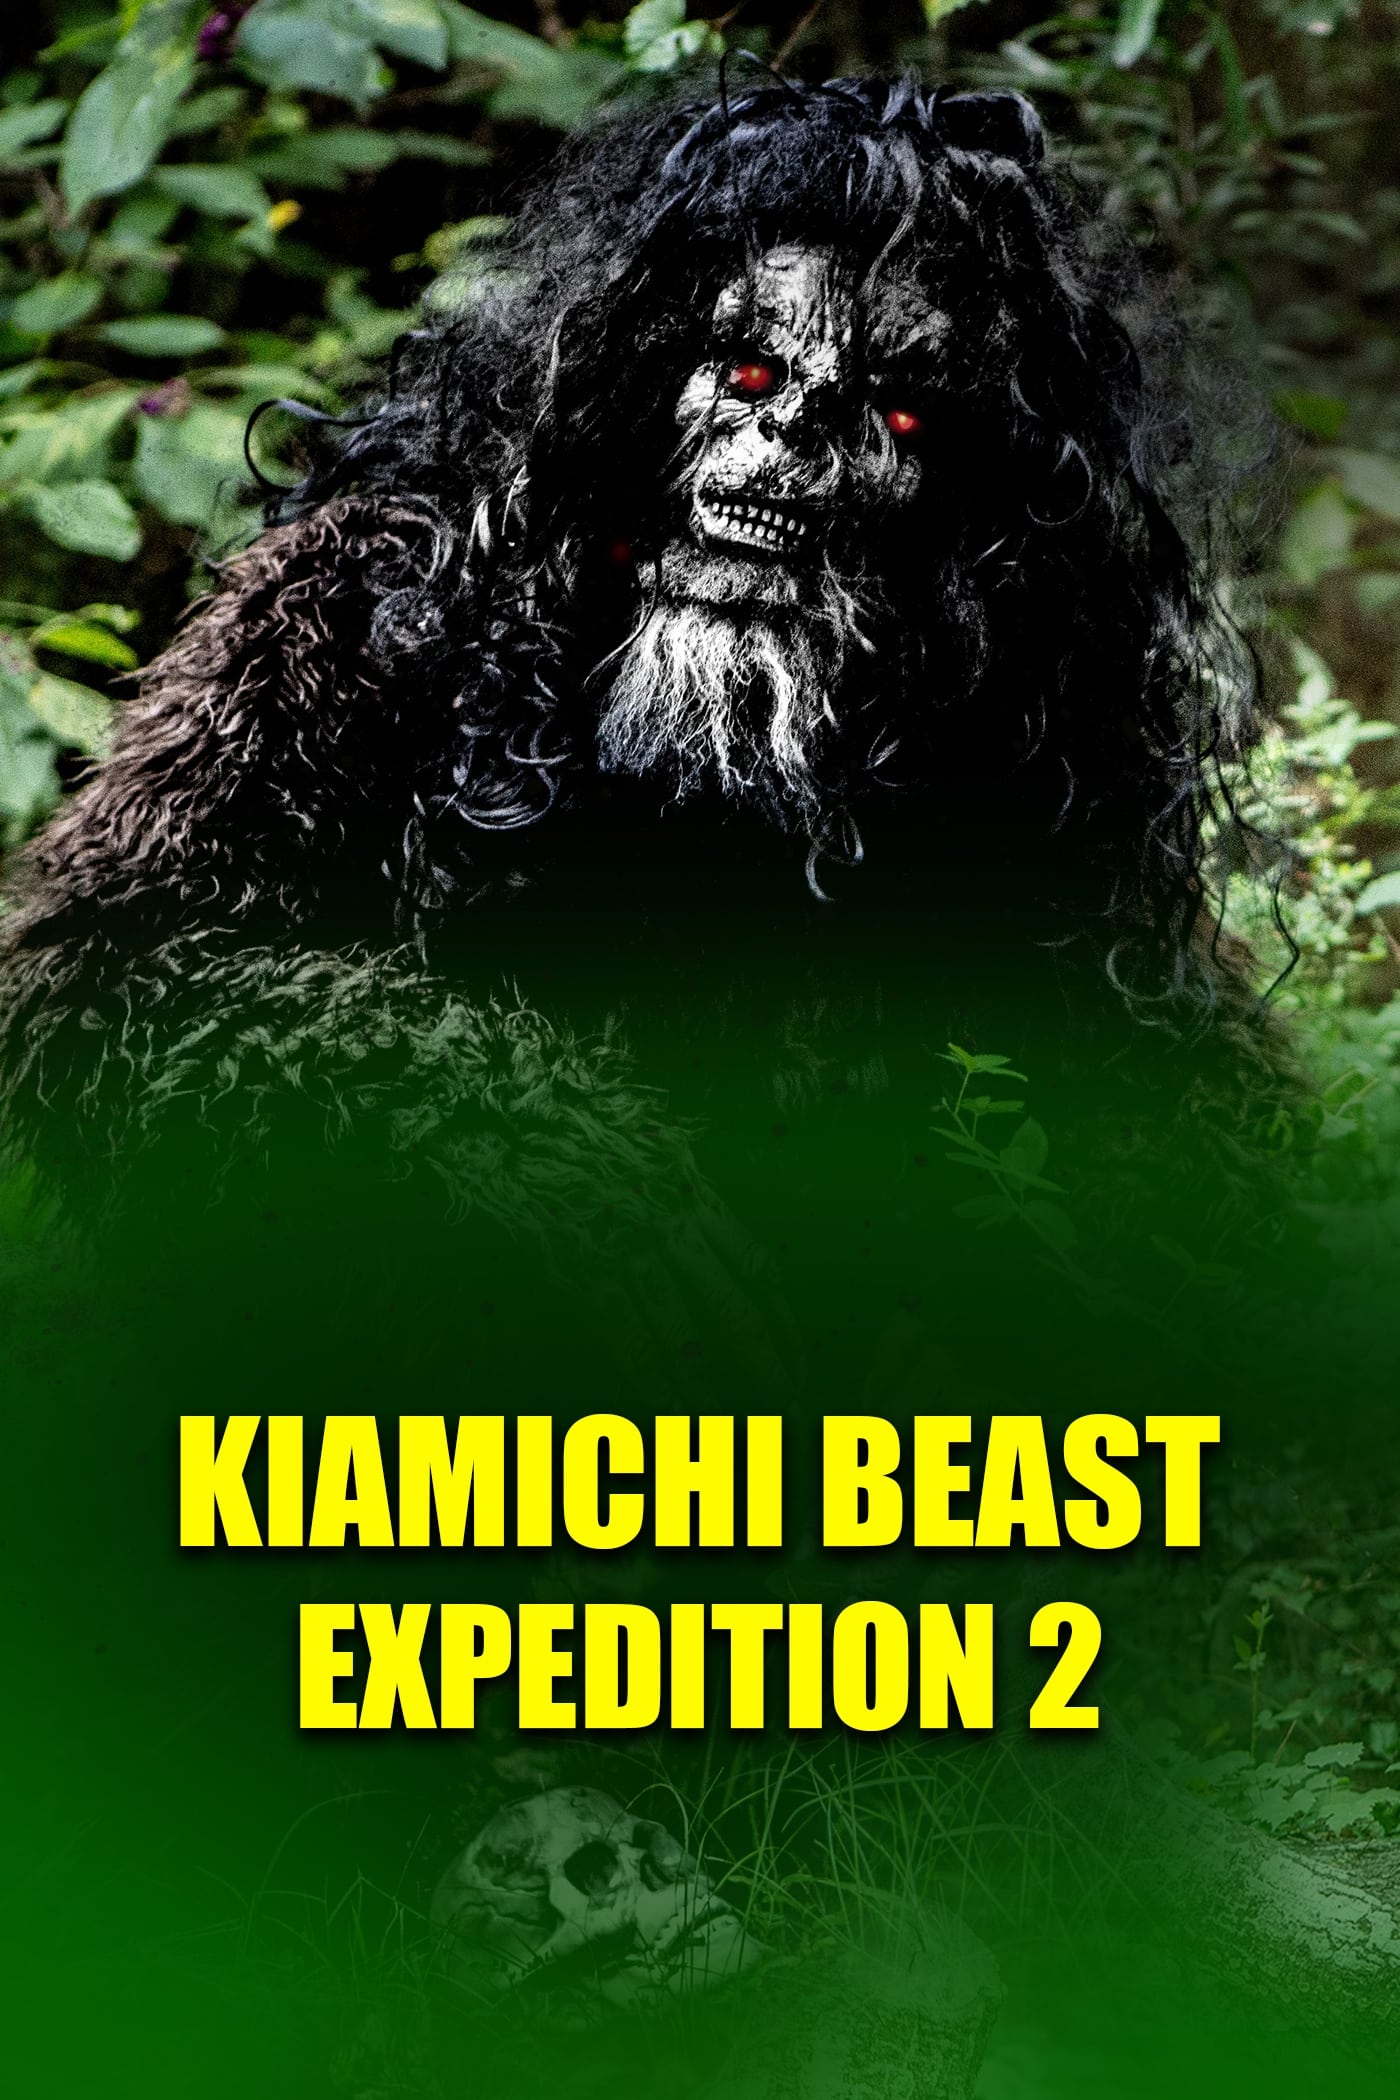 Kiamichi Beast expedition 2 on FREECABLE TV